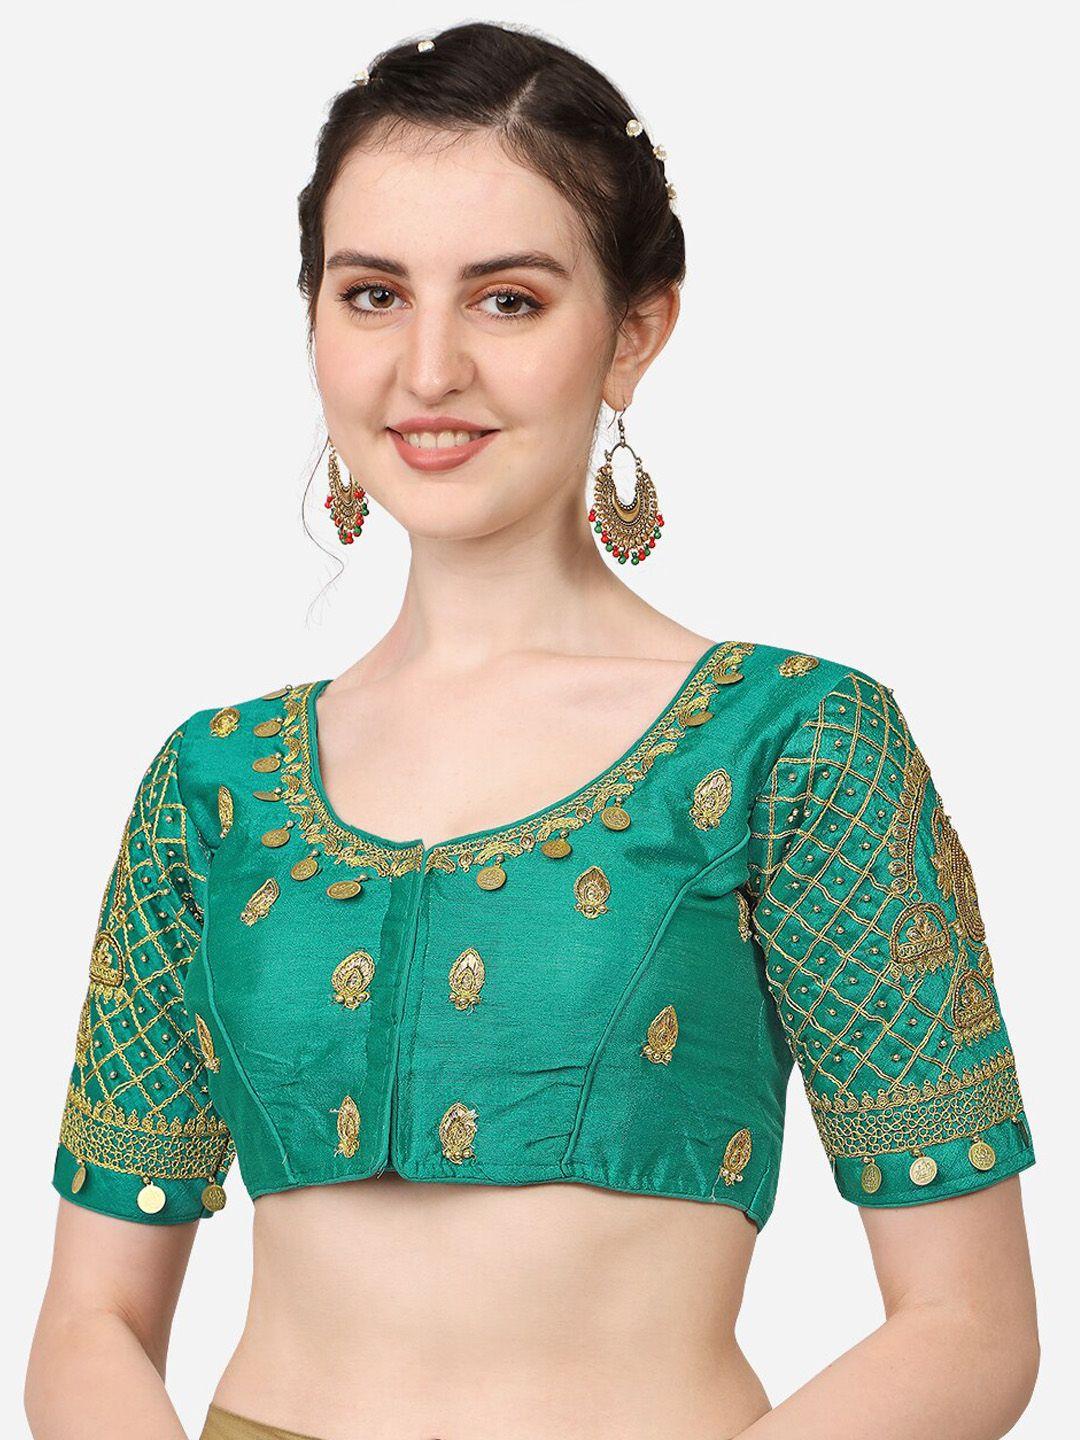 pujia-mills-women-teal-blue-embroidered-saree-blouse